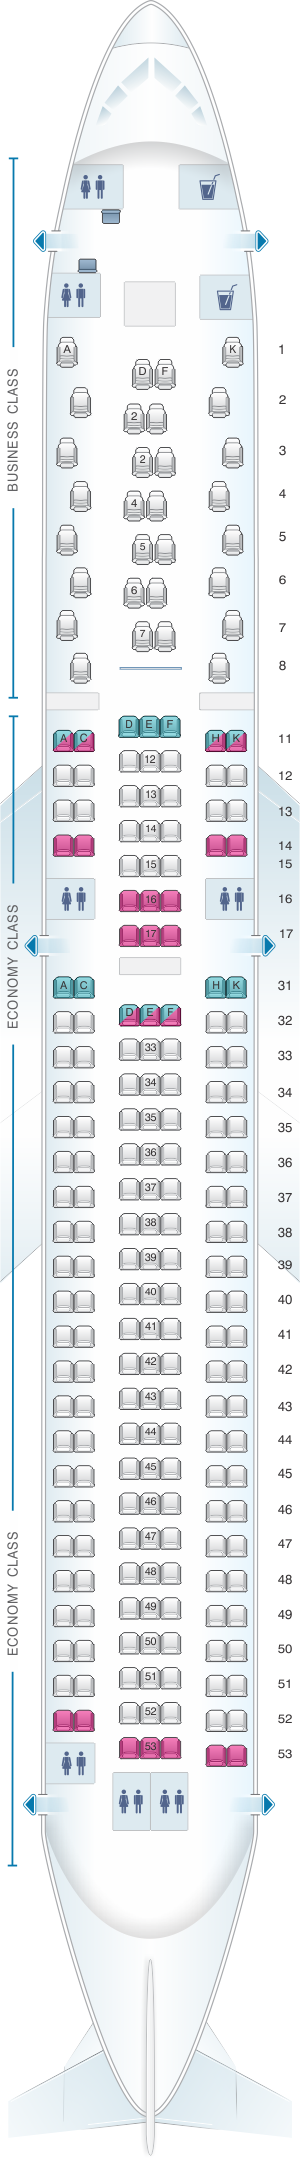 Seat map for Air Astana Boeing B767 300 ER